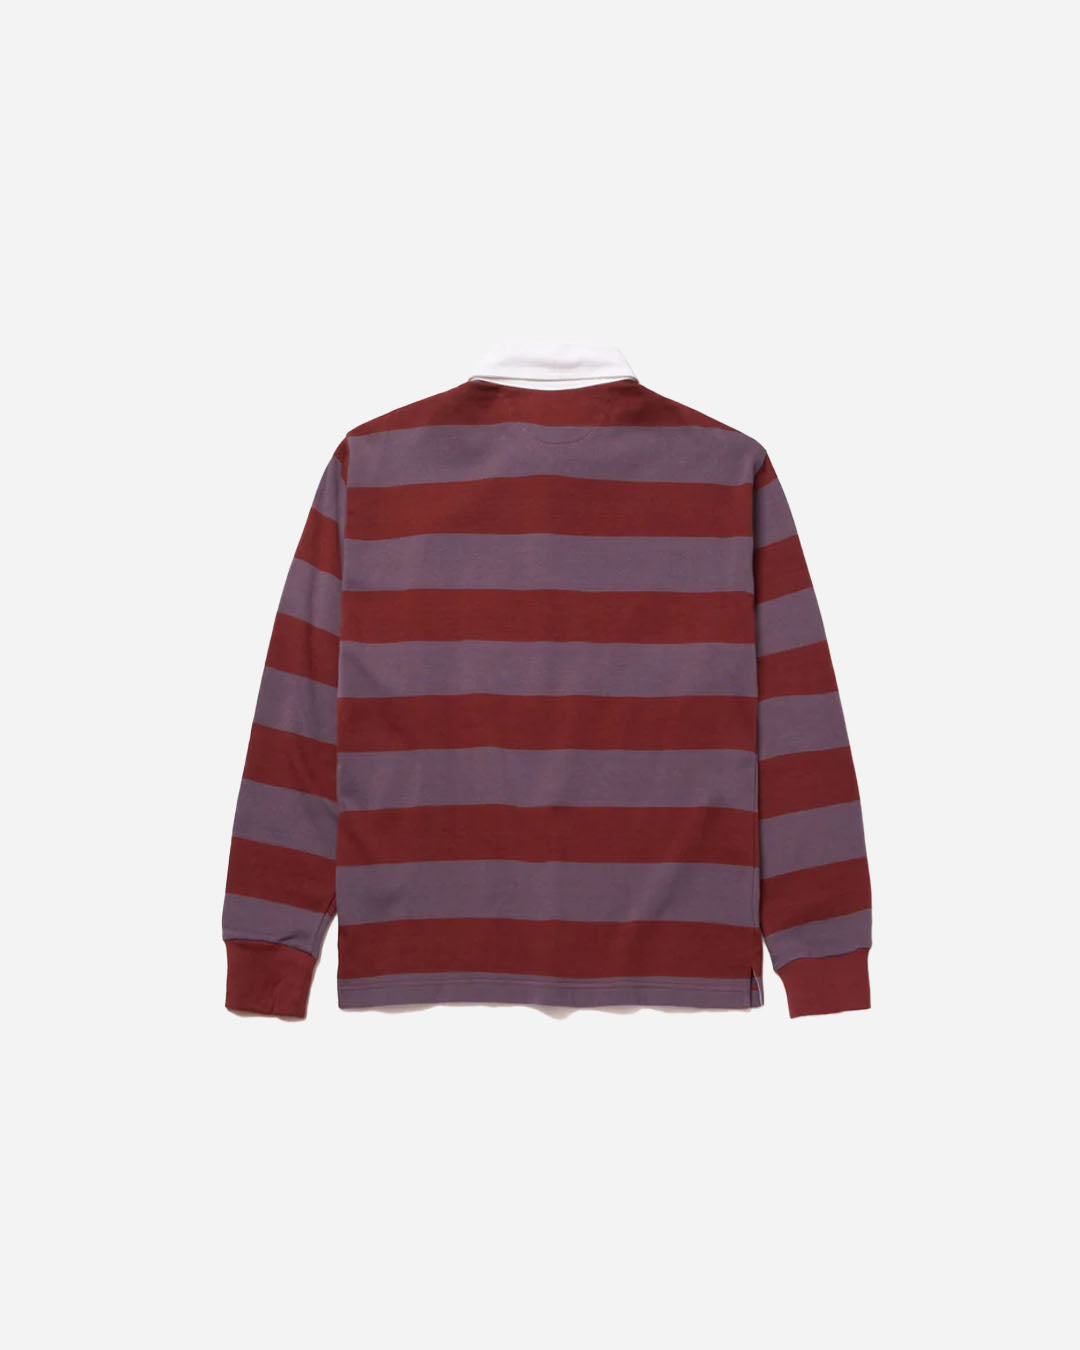 YORKE L/S RUGBY SHIRT